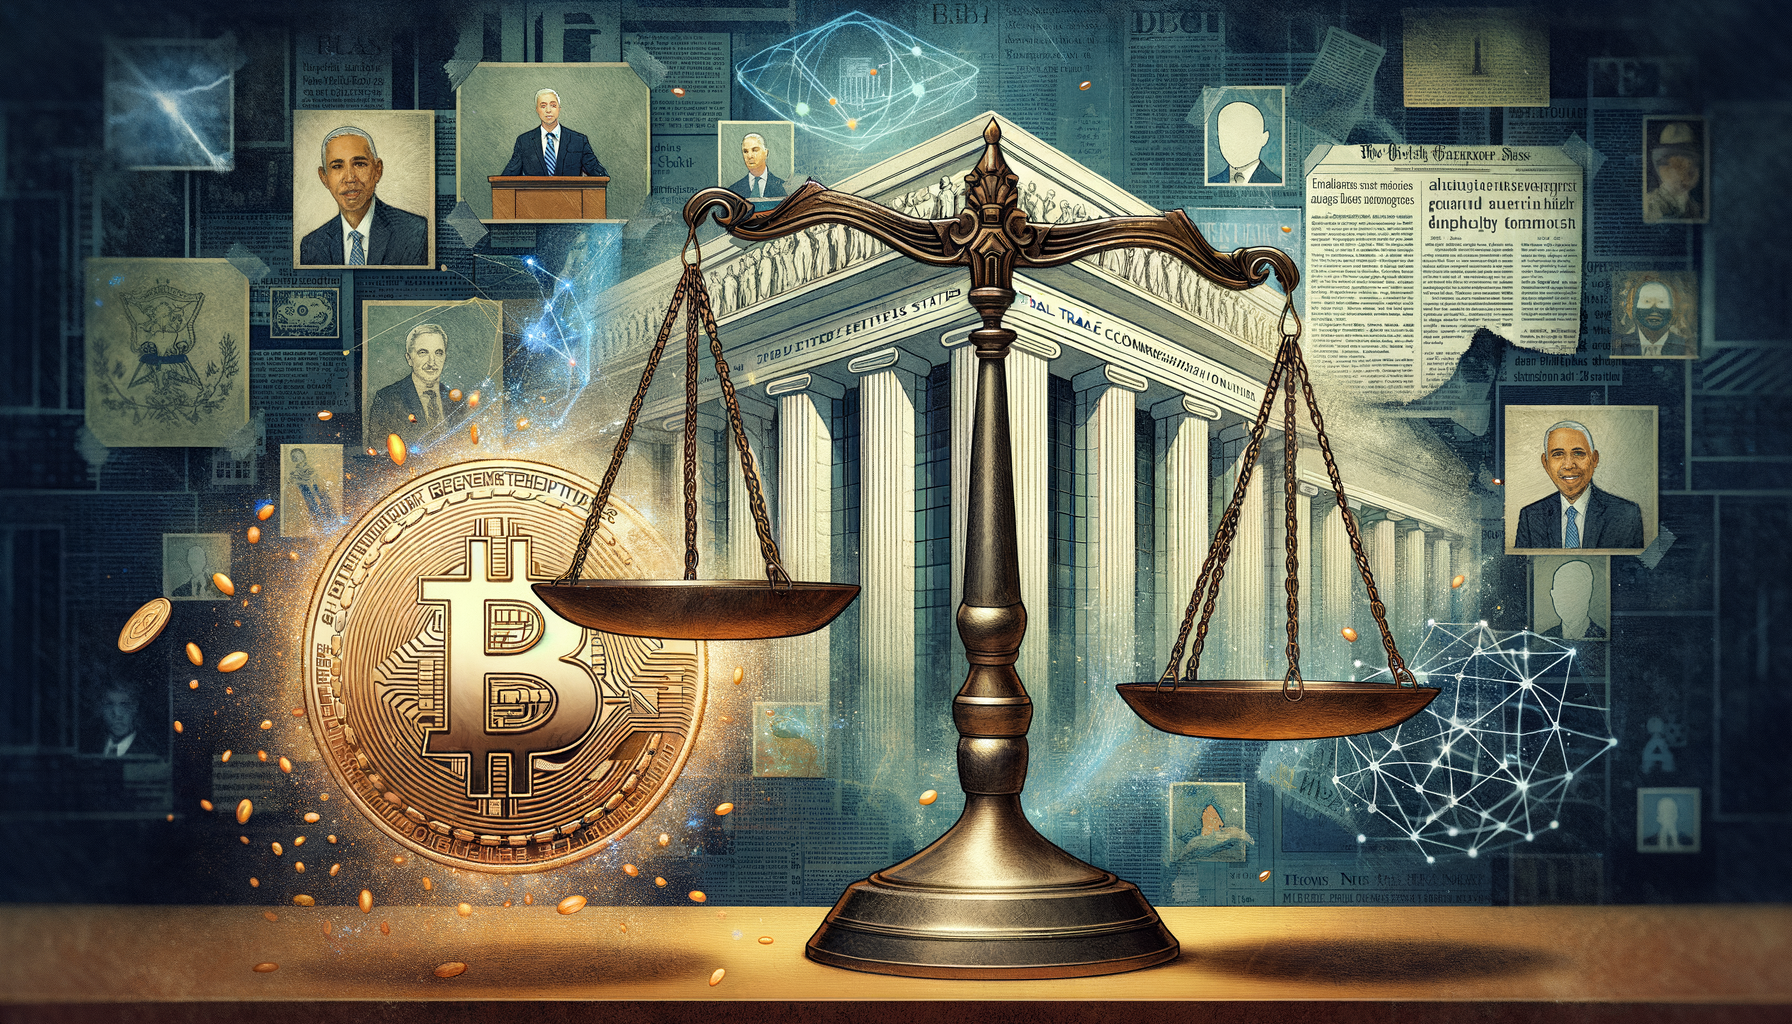 The US Federal Trade Commission vs. Bitcoin Funding Team